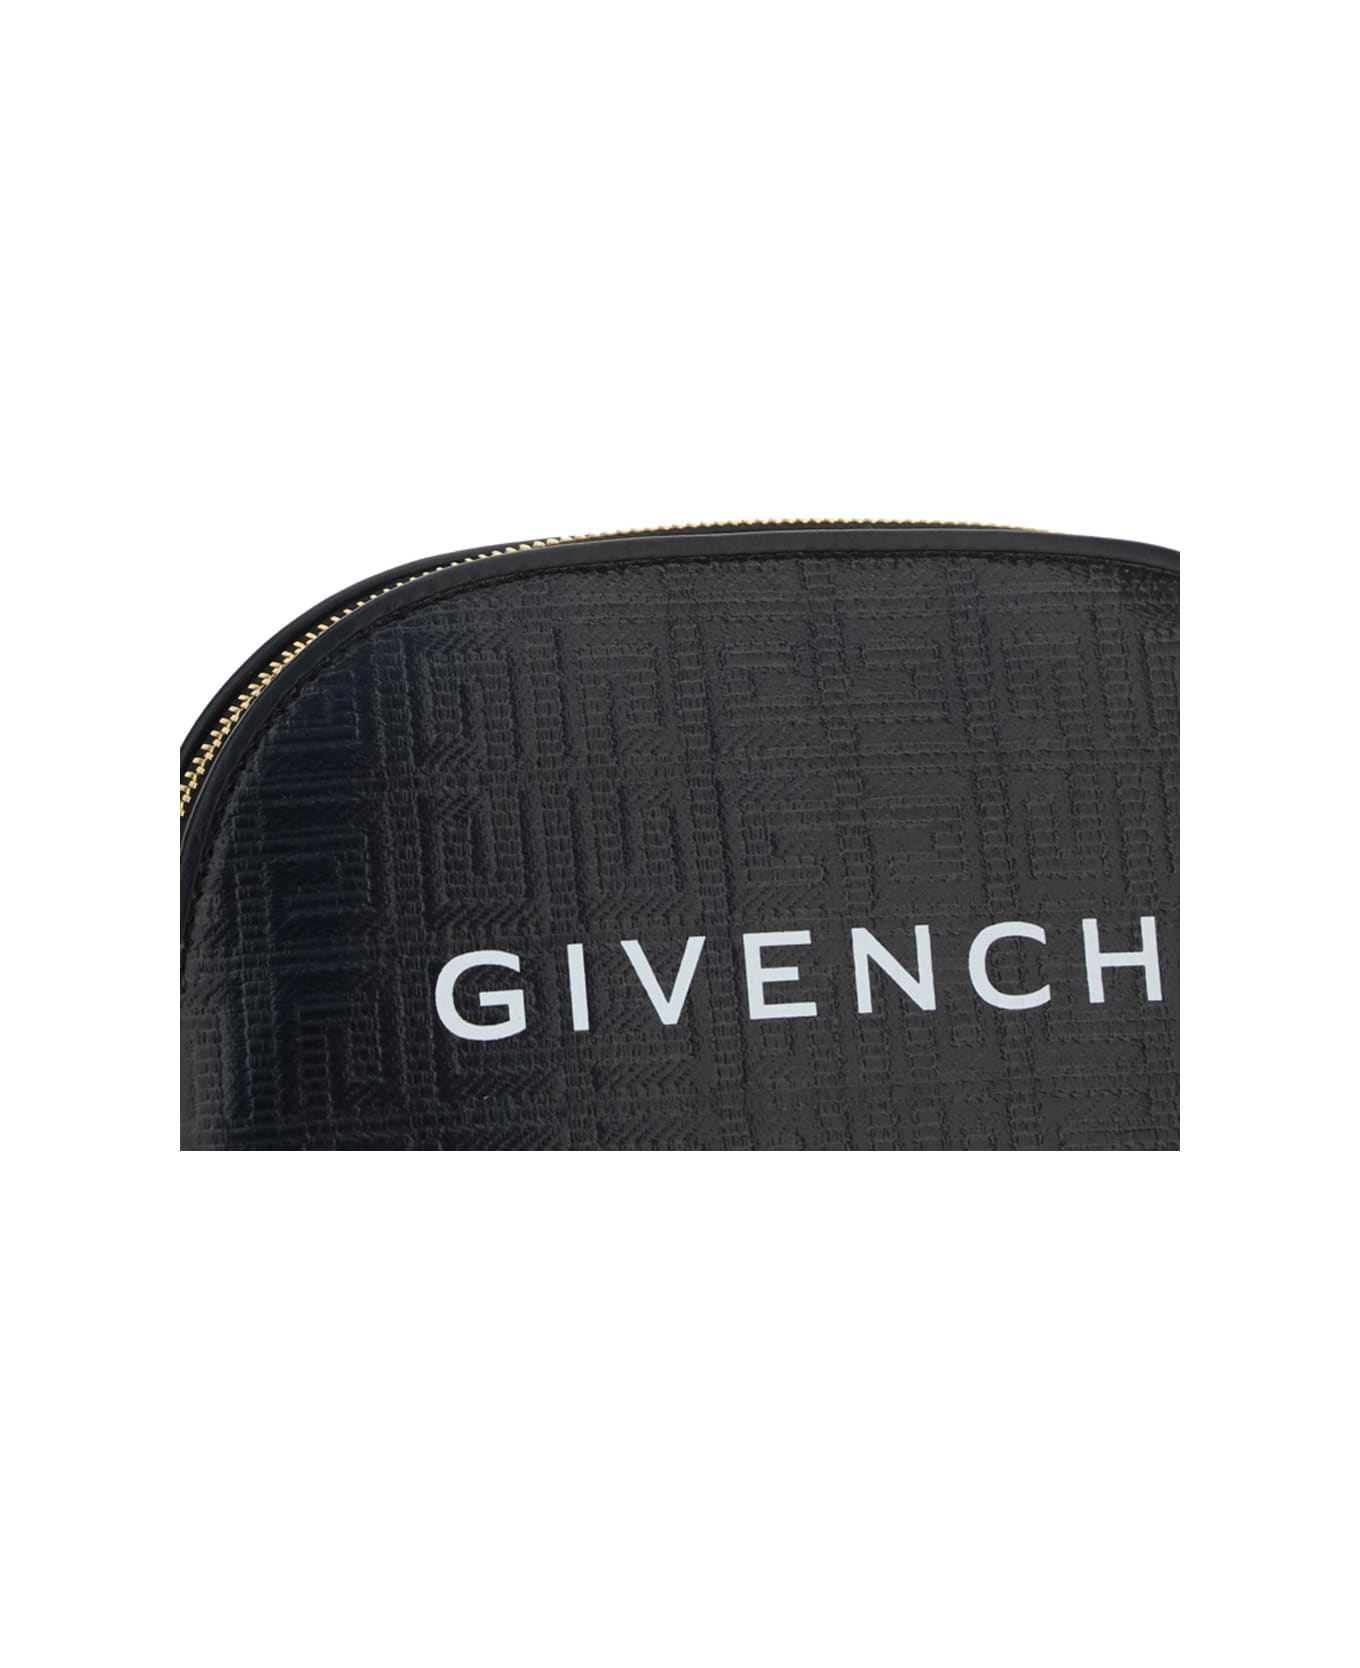 Givenchy G-essentials Pouch - Black